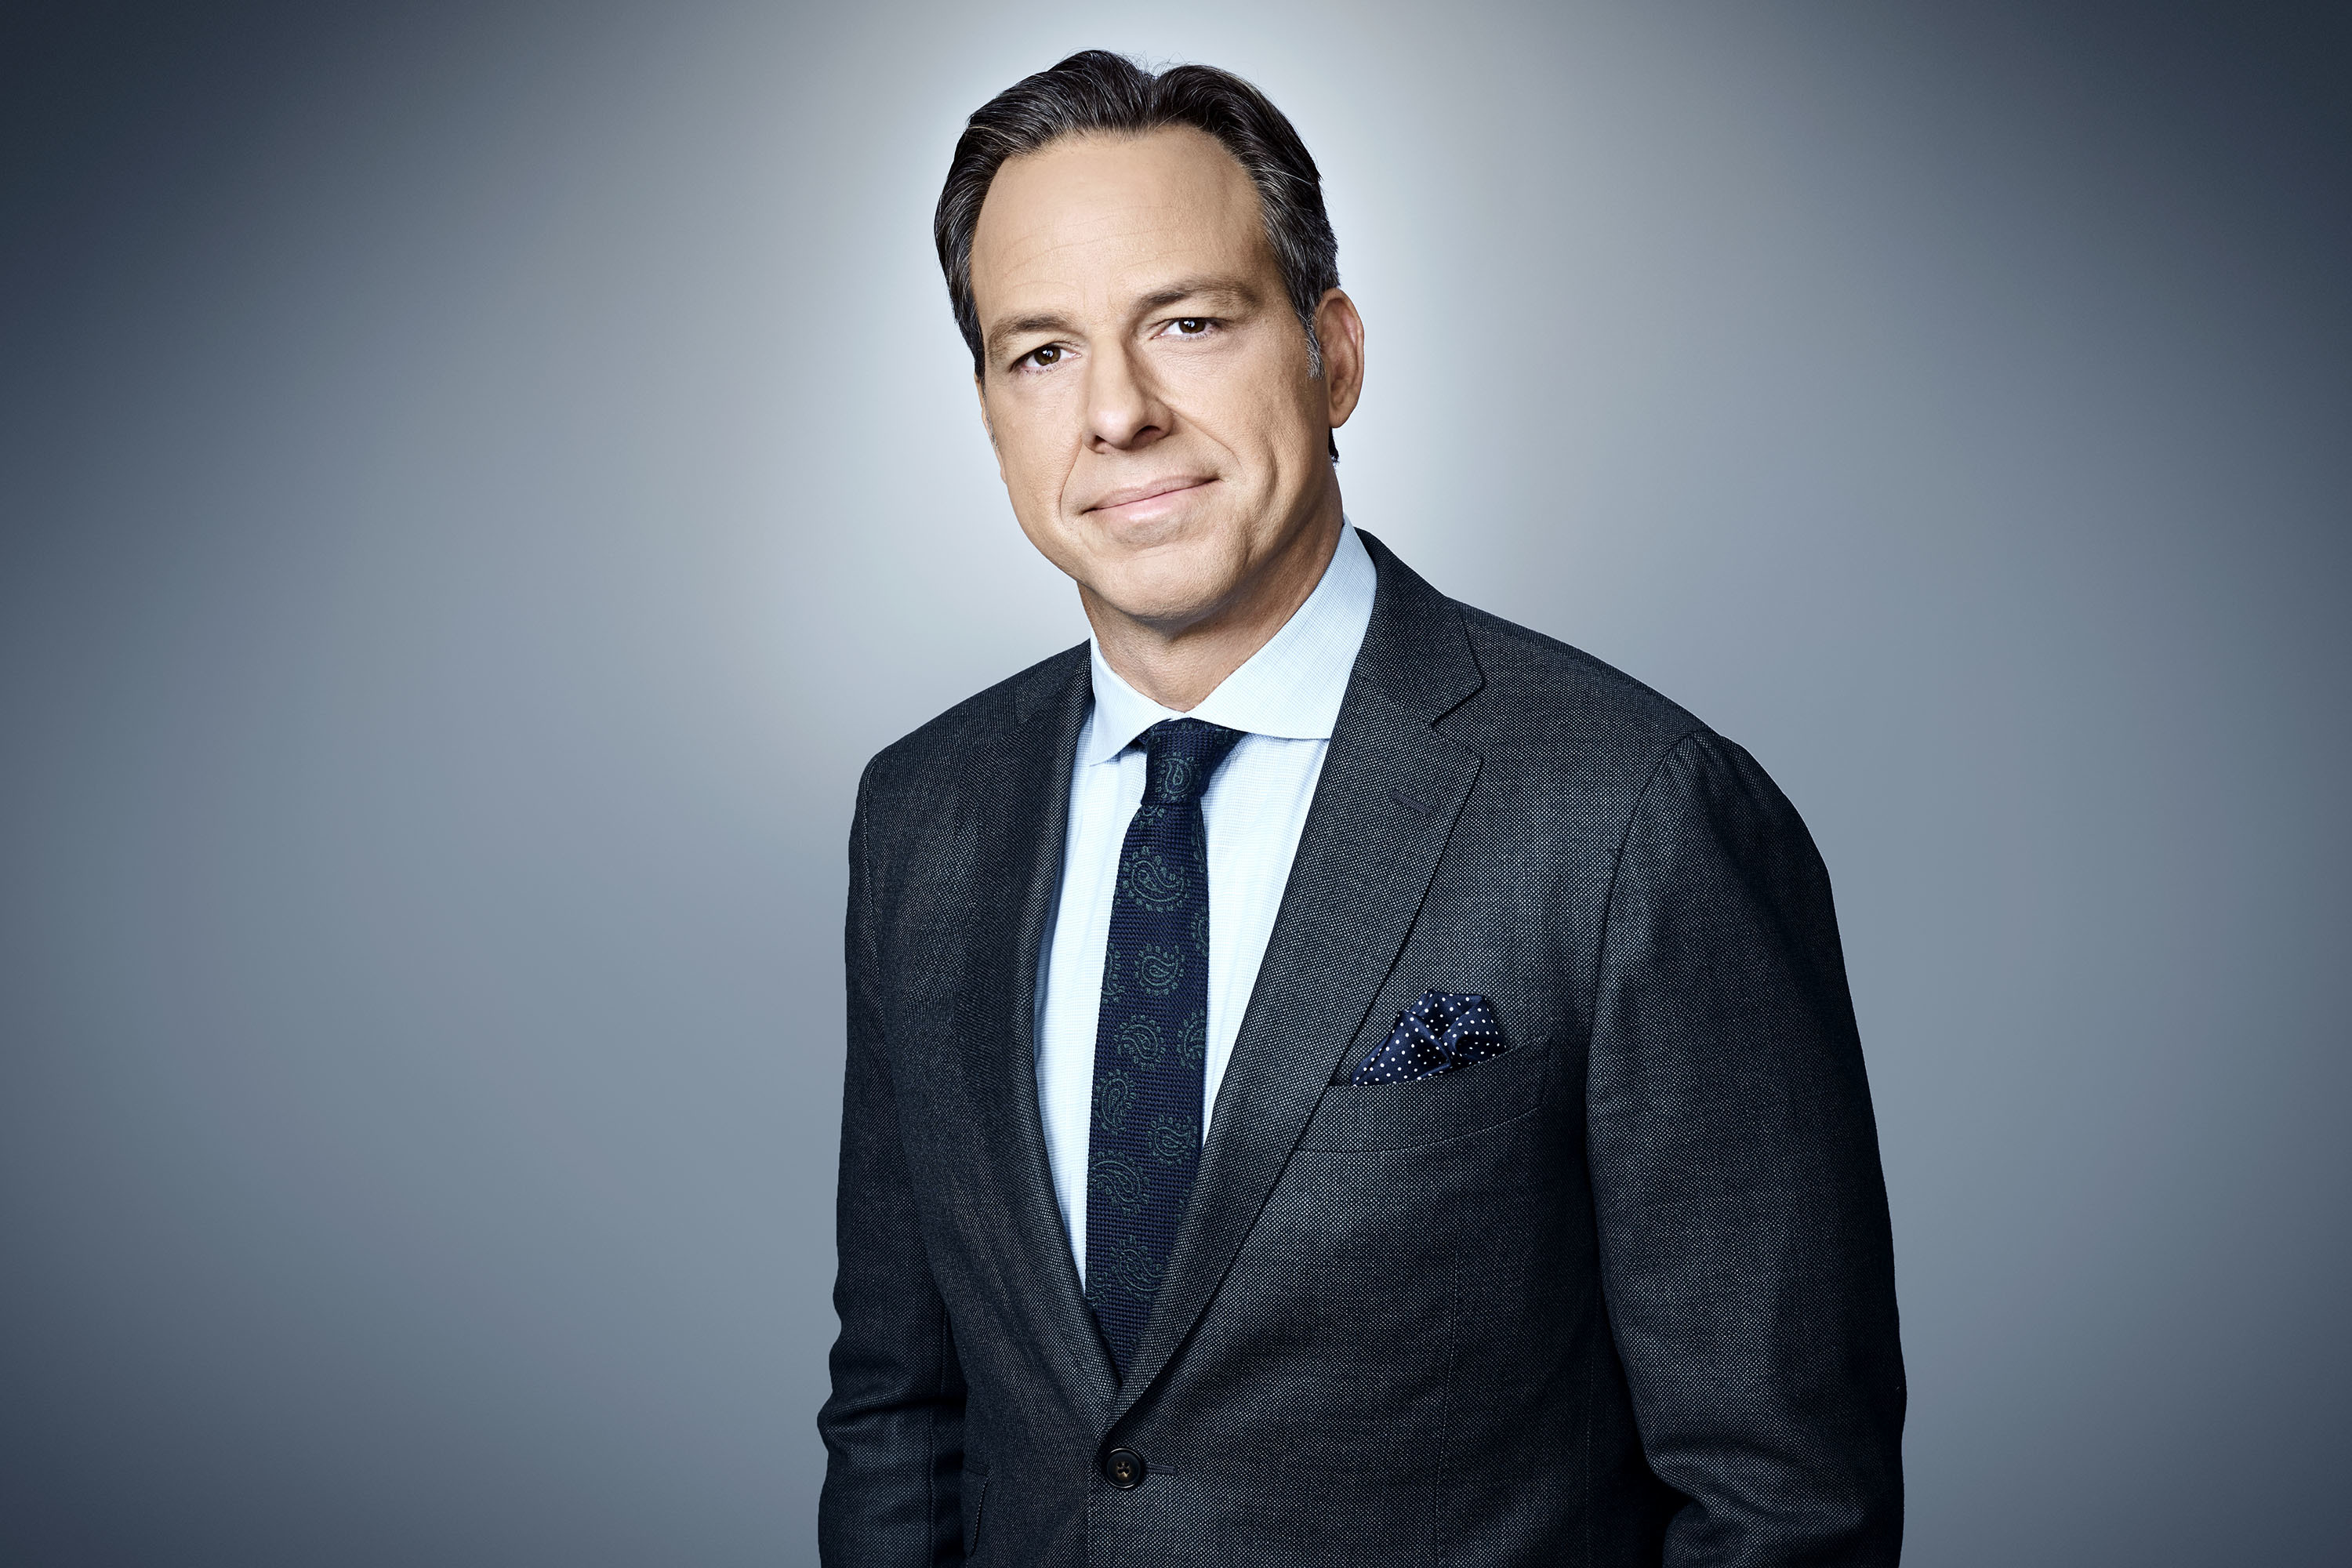 abc-announces-schedule-update-jake-tapper-keynote-moves-to-may-16